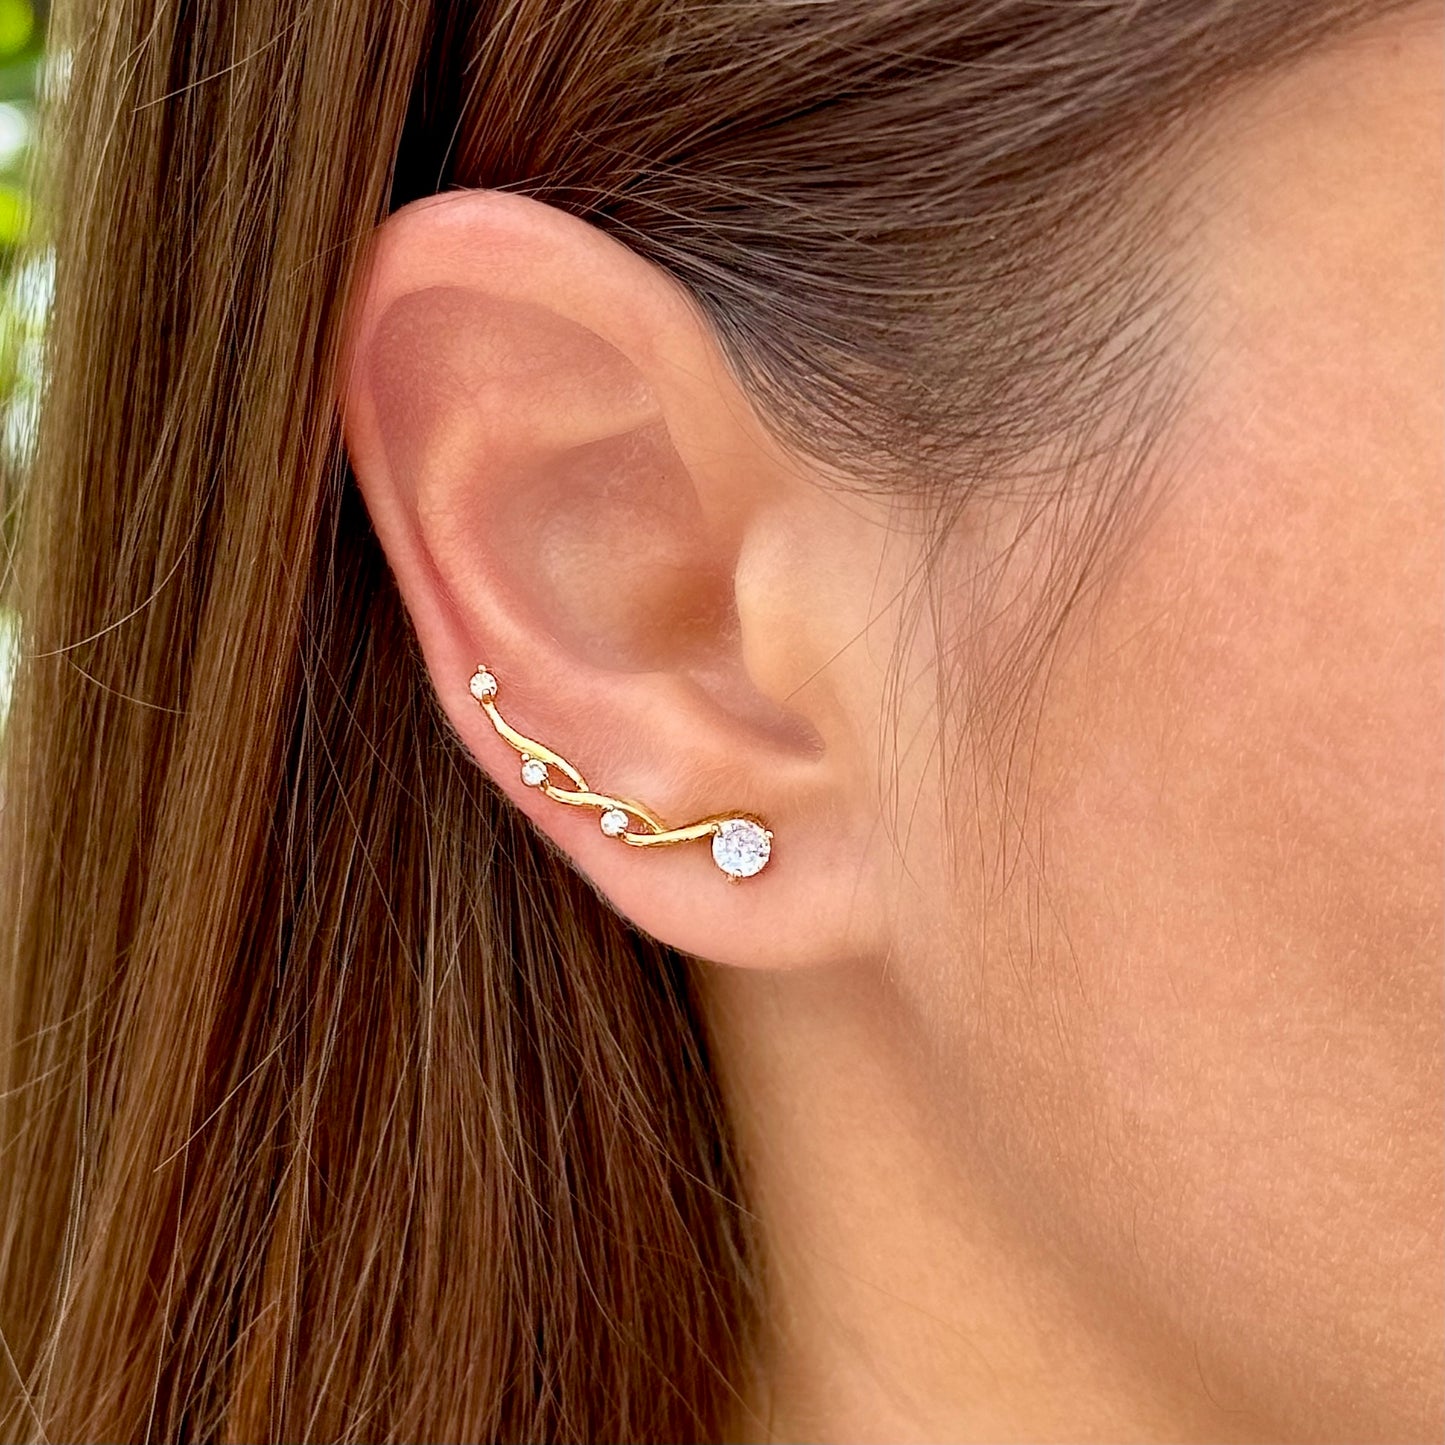 Infinity ear climbers with CZ diamonds - Sterling Silver 925